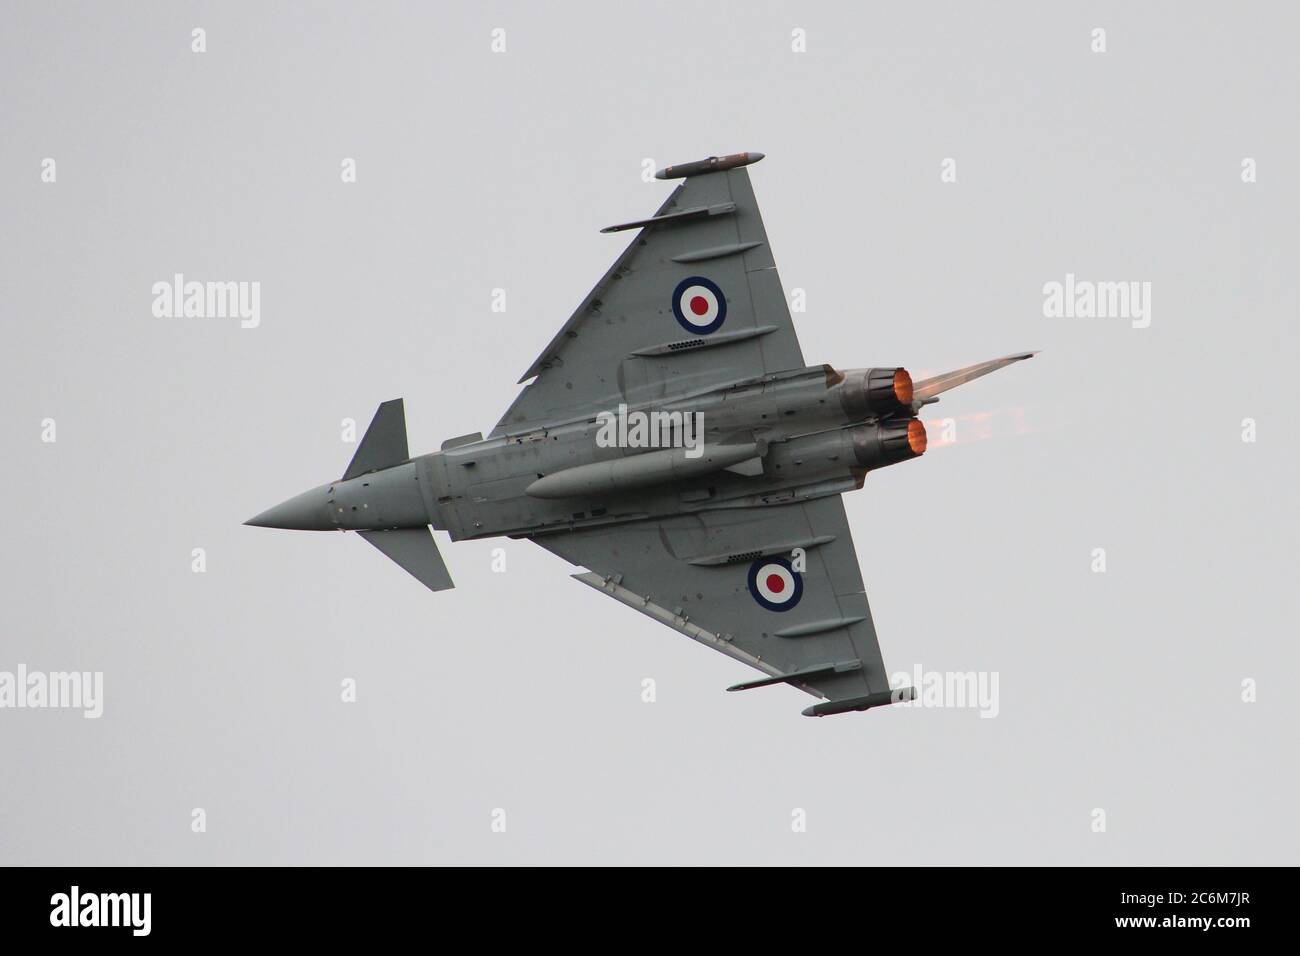 ZK349, a Eurofighter Typhoon FGR4 operated by the Royal Air Force, during its display at Scotland's National Airshow at East Fortune in 2015. Stock Photo